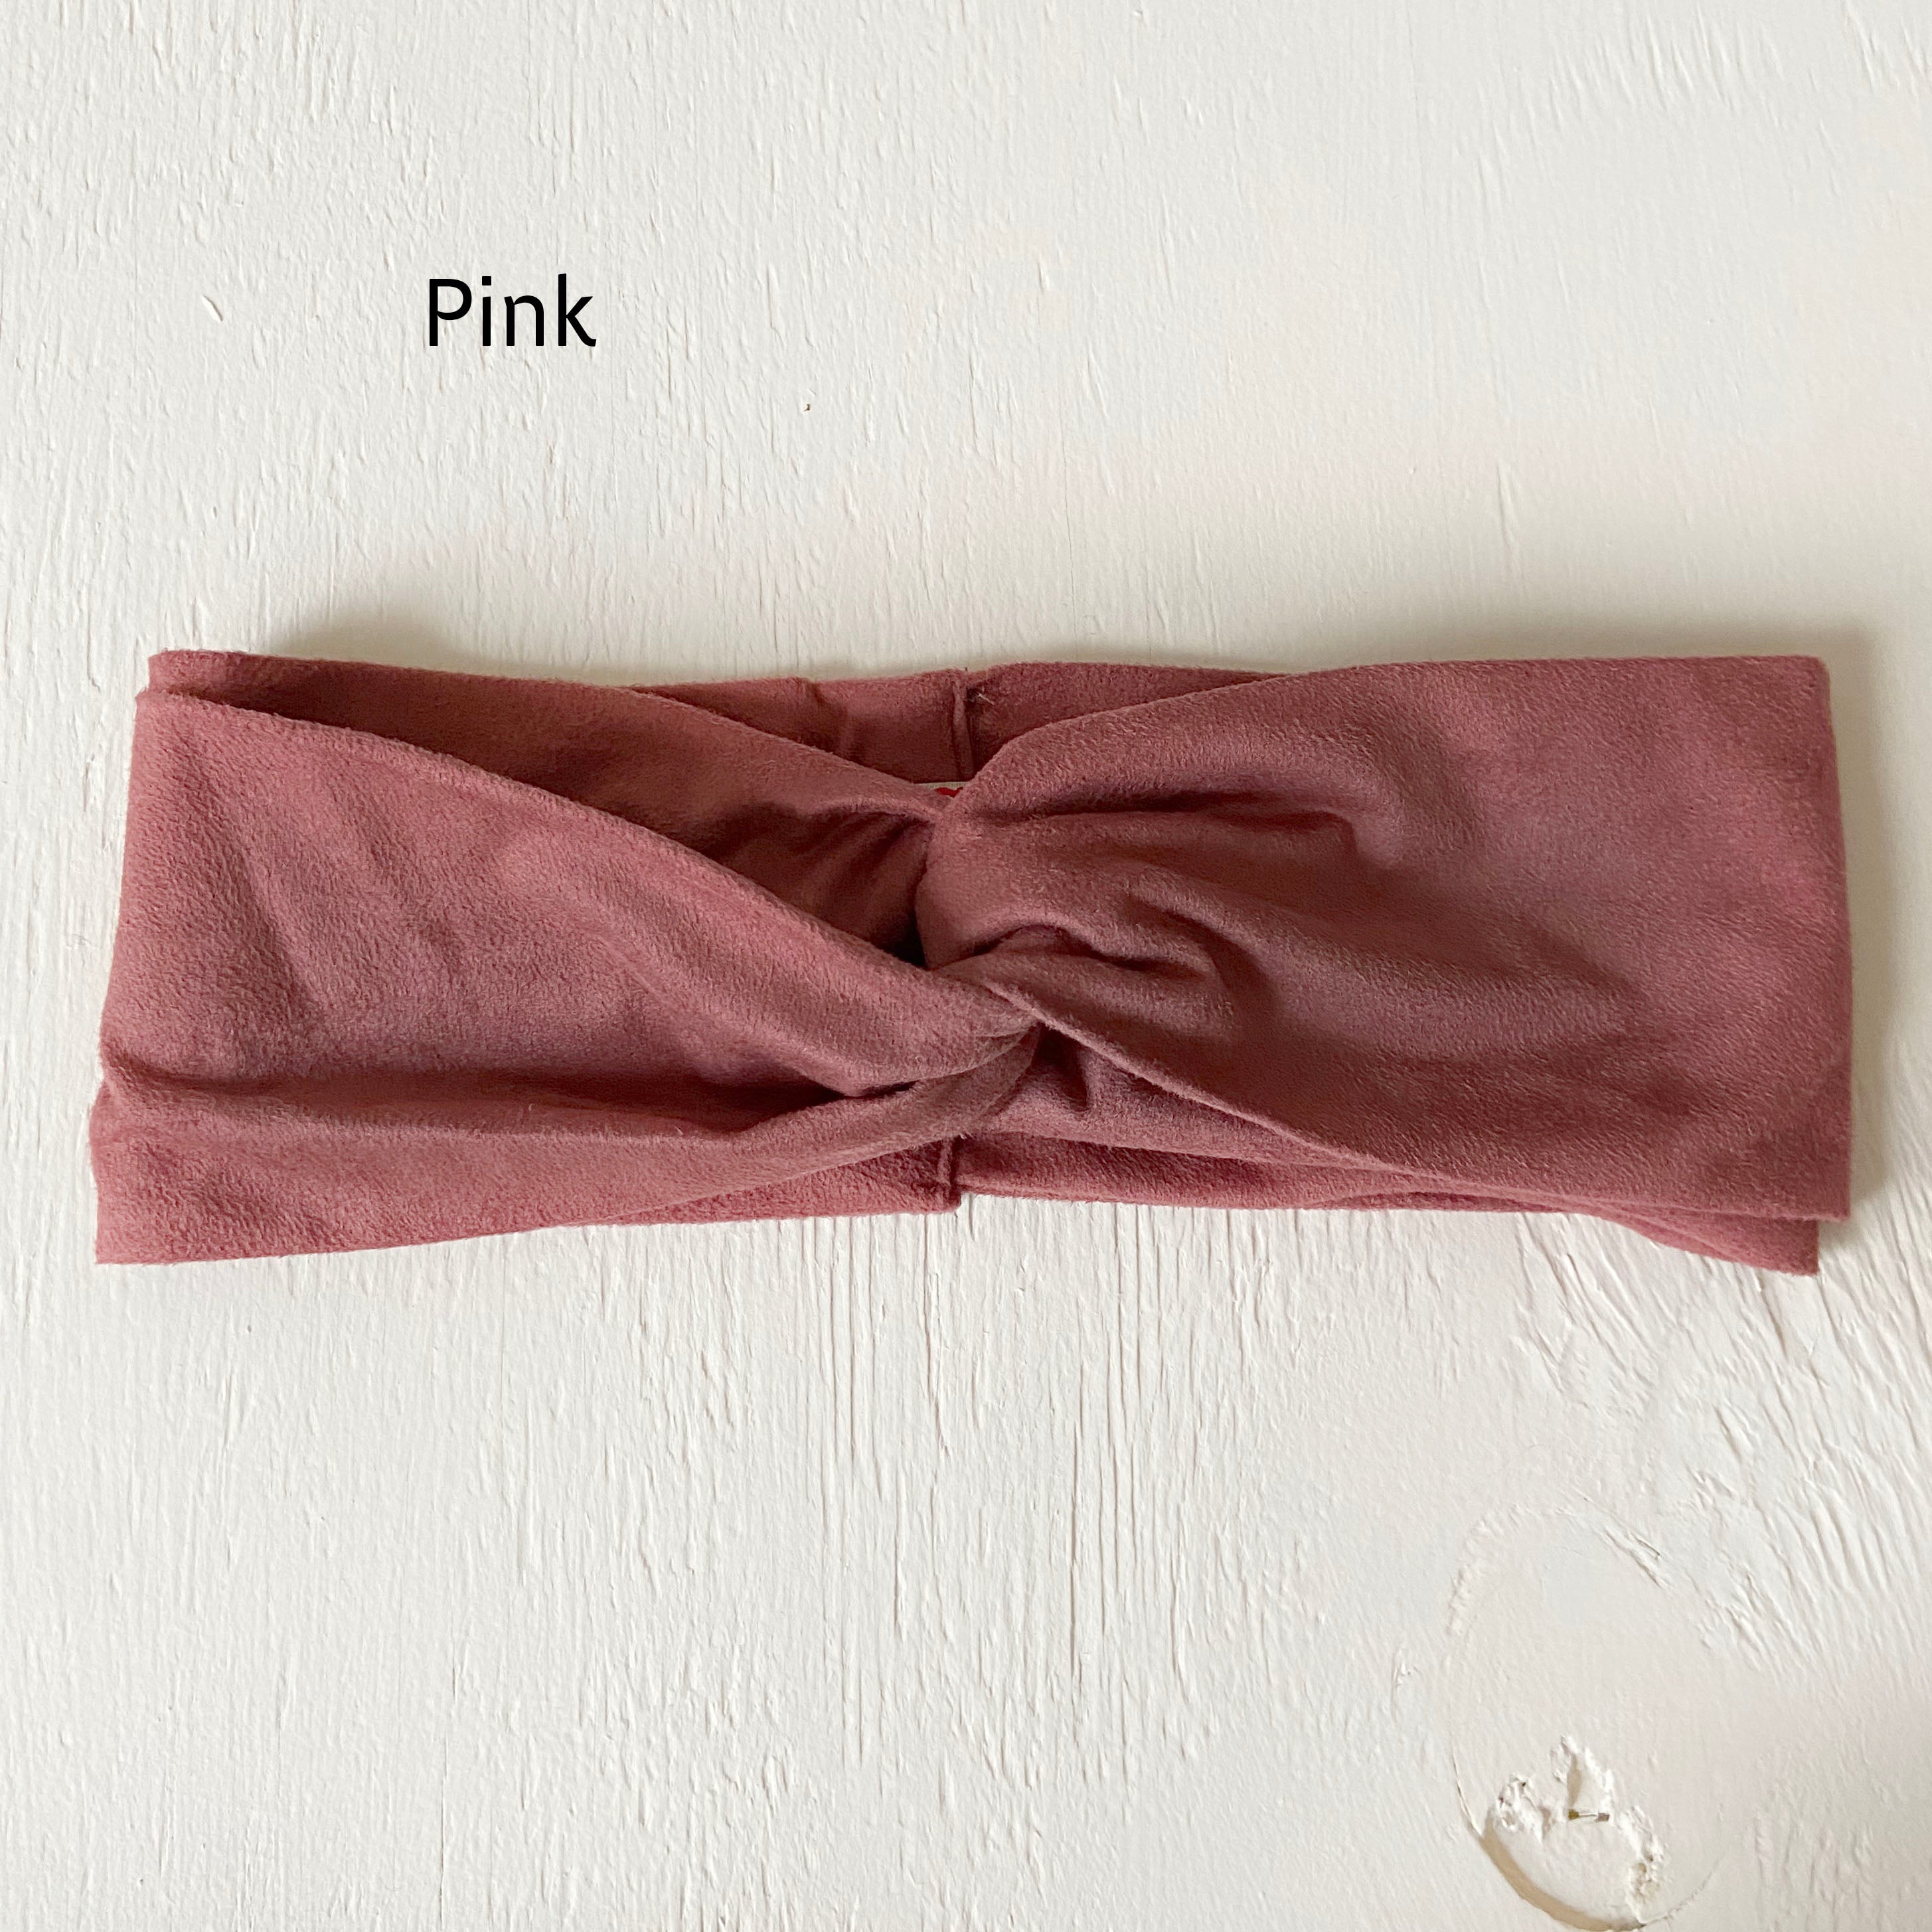 Headband Twisted  Faux Suede 4 colors